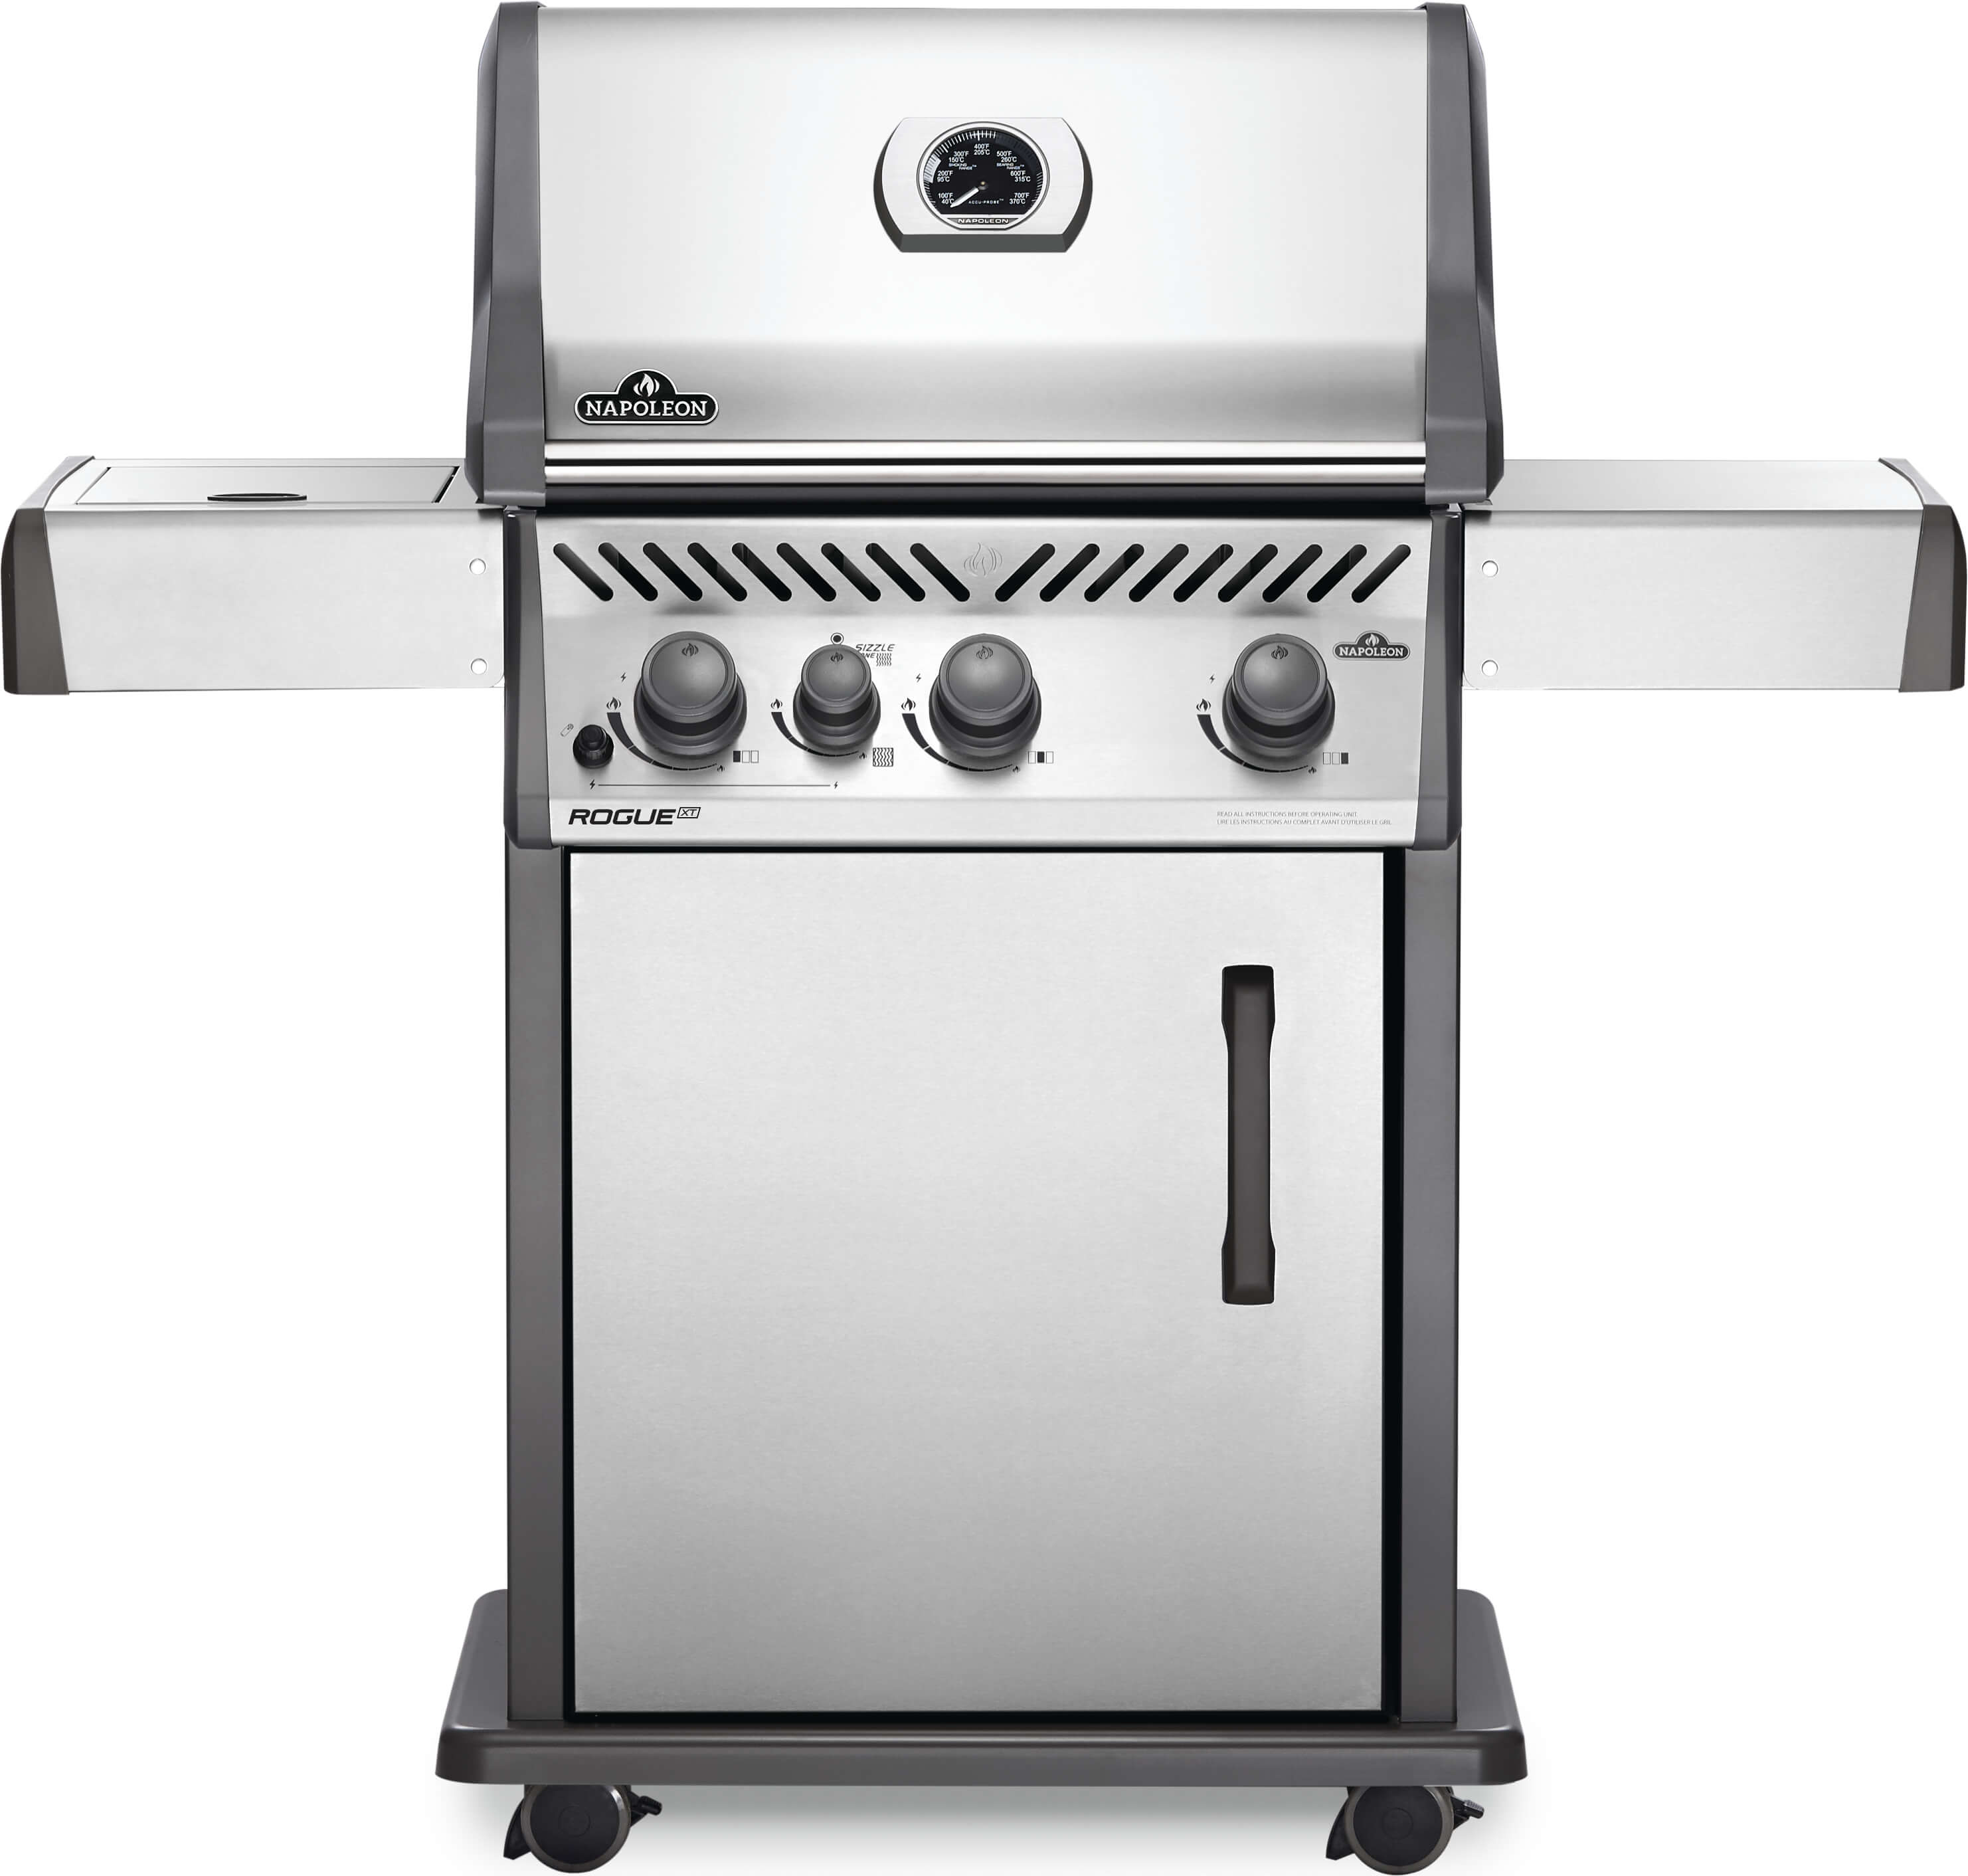 Rogue® XT 425 Natural Gas Grill with Infrared Side Burner, Stainless Steel - image 1 of 12